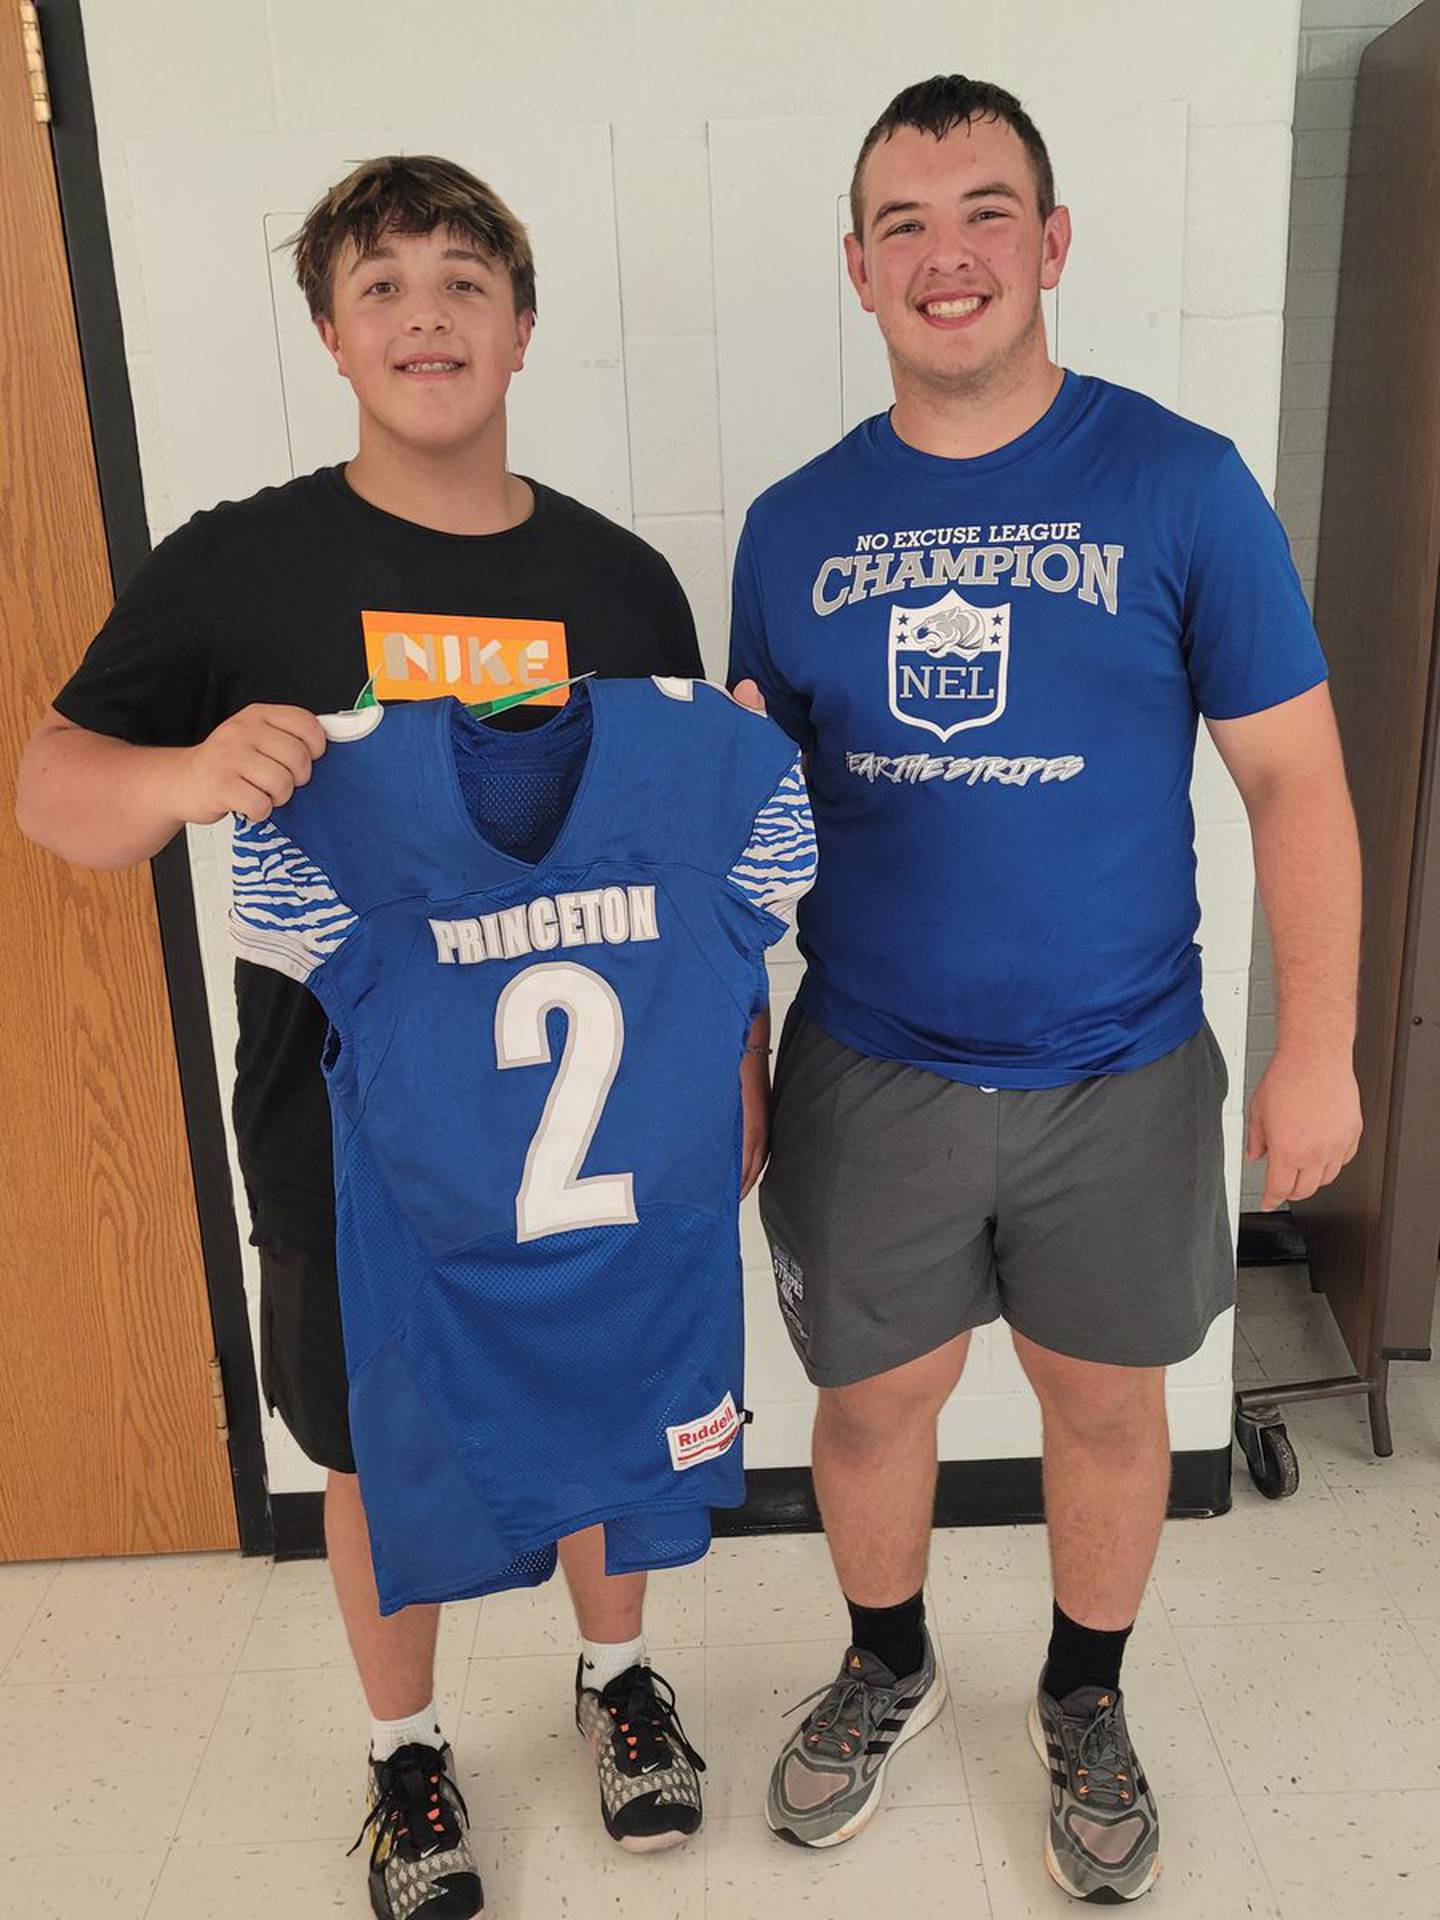 Captain Cade Odell of "Back to Back" chose fellow lineman Anthony Vujanov with his first pick in the Tigers' "NEL" Draft because "we wanted to keep the left side of the line together.